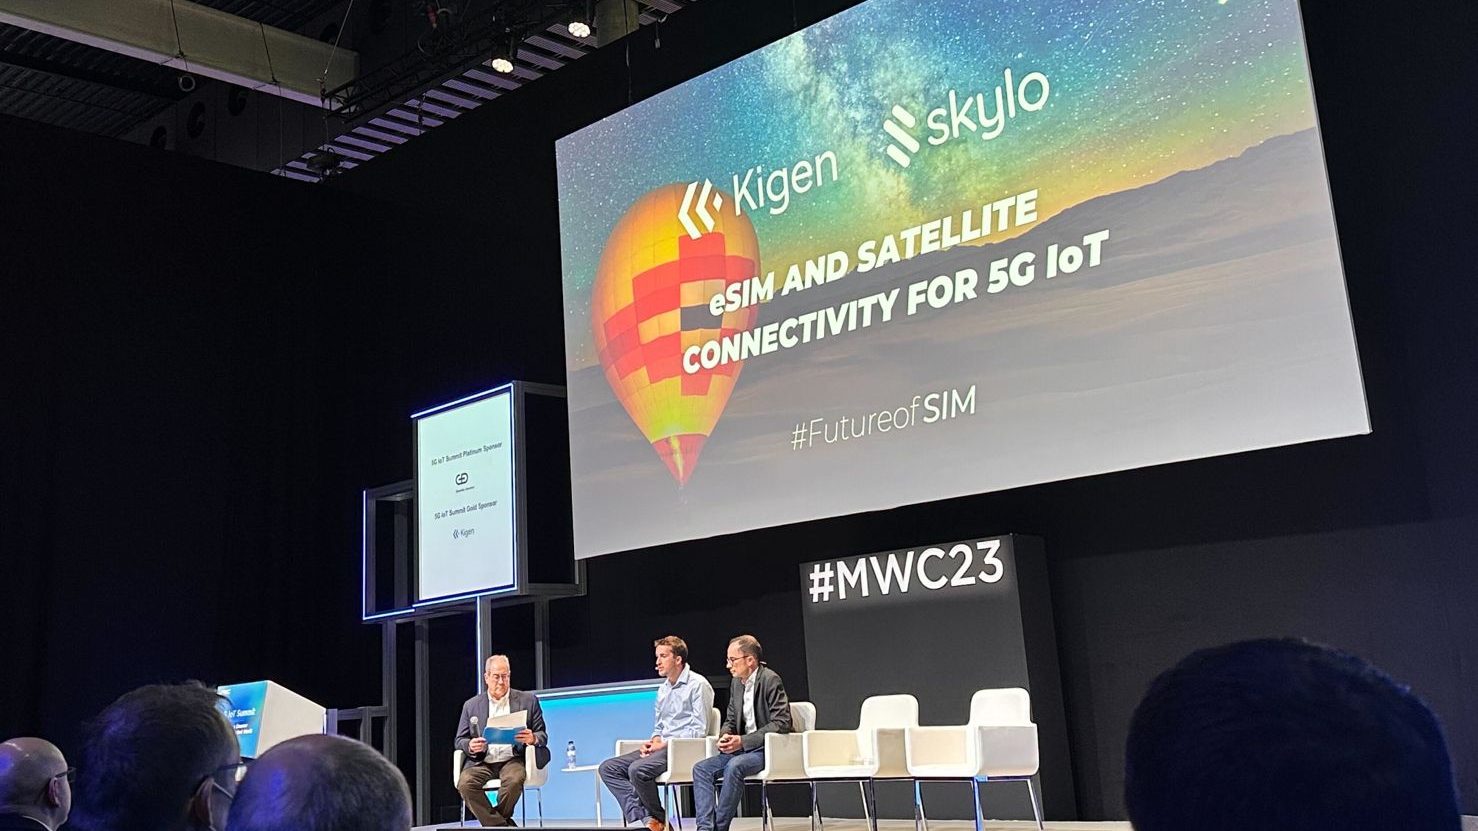 Kigen and Skylo present the opportunities in satellite and cellular connectivity convergence at GSMA 5G IoT Summit during MWC23 Barcelona.